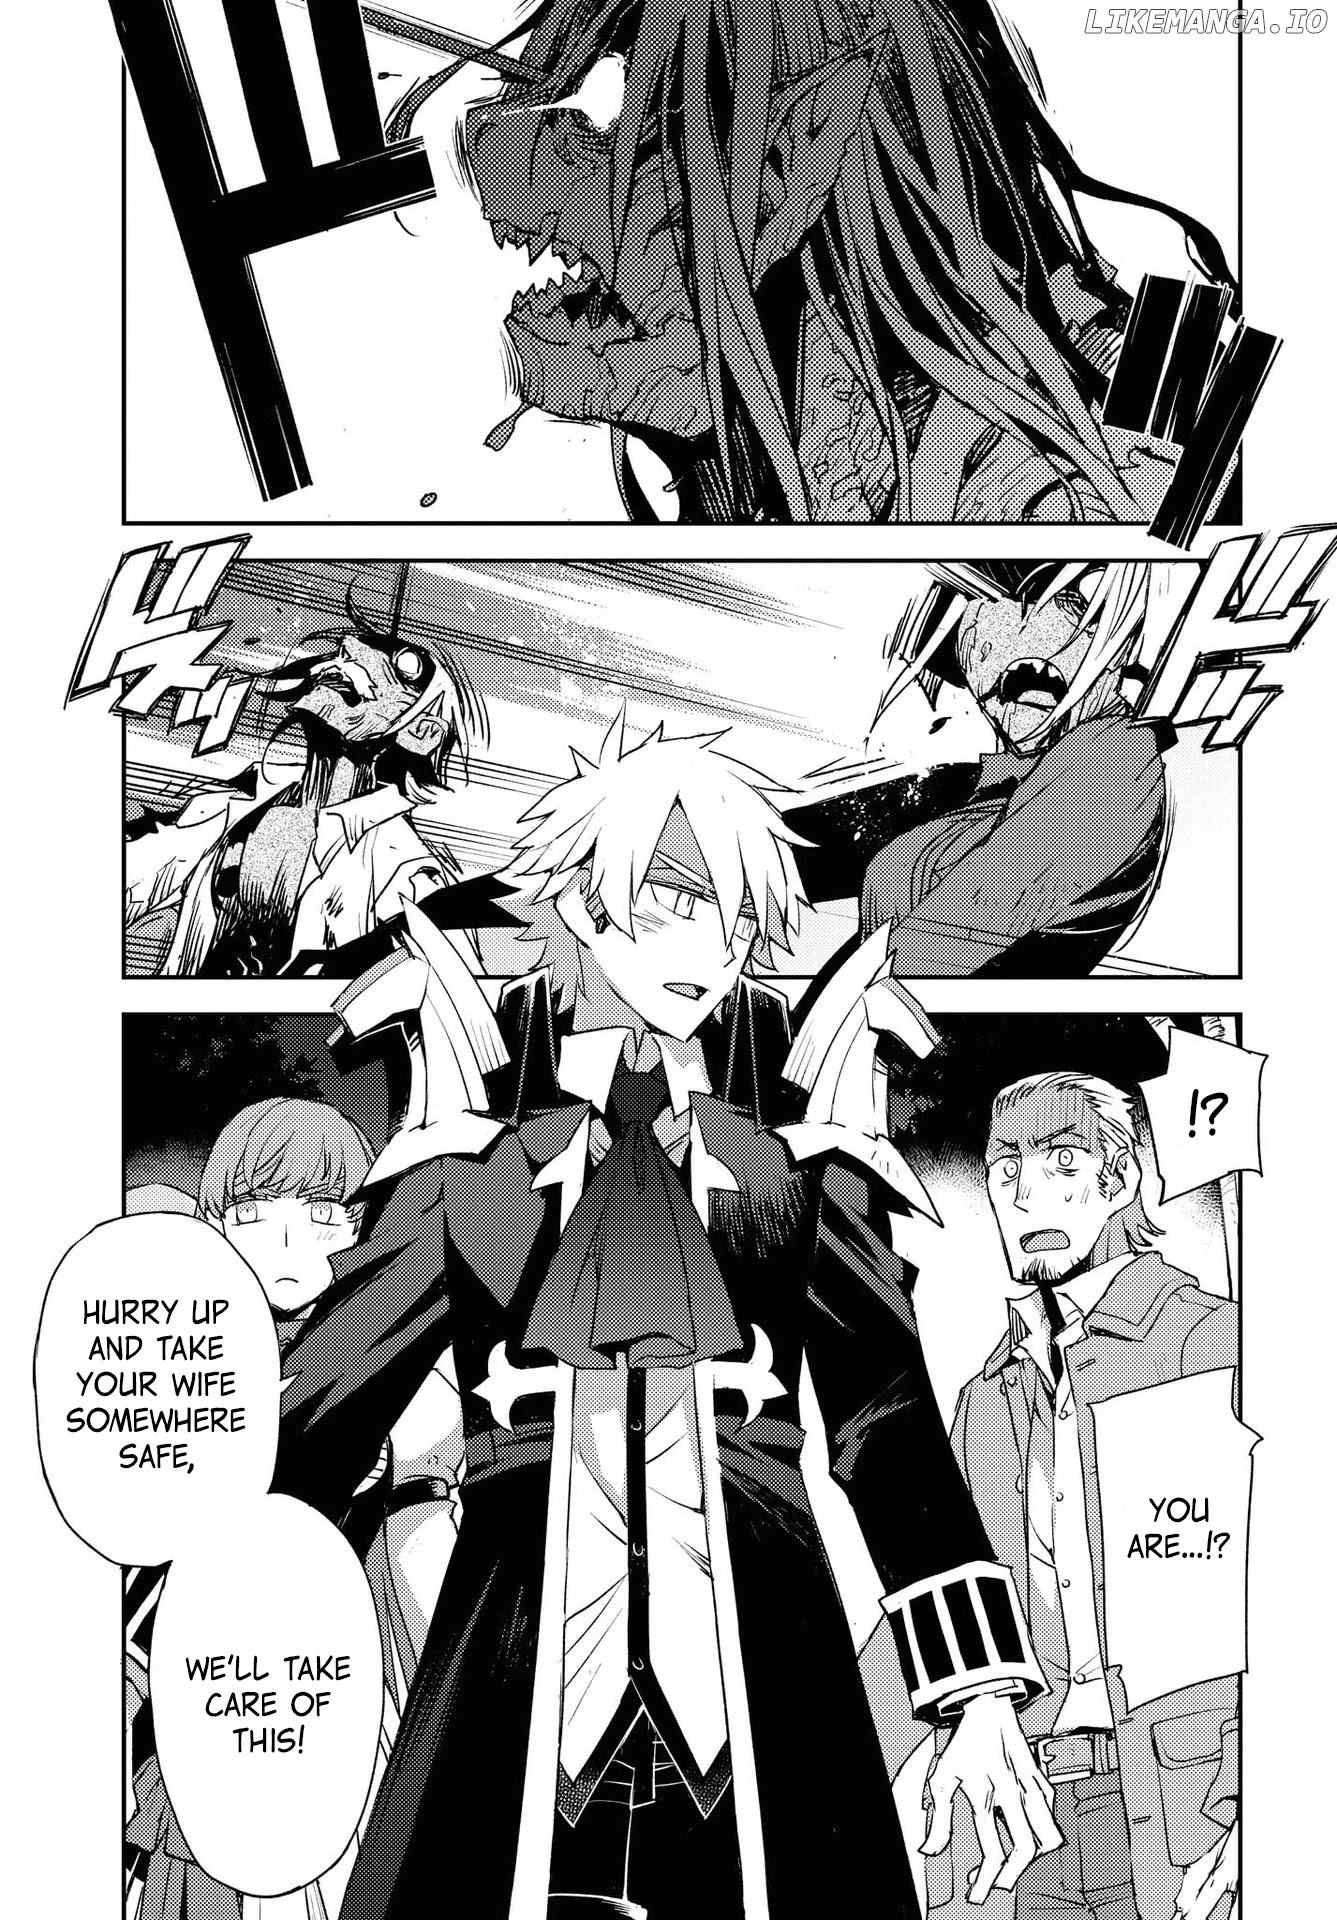 Fate/Grand Order: Epic of Remnant - Subspecies Singularity IV: Taboo Advent Salem: Salem of Heresy chapter 16 - page 3